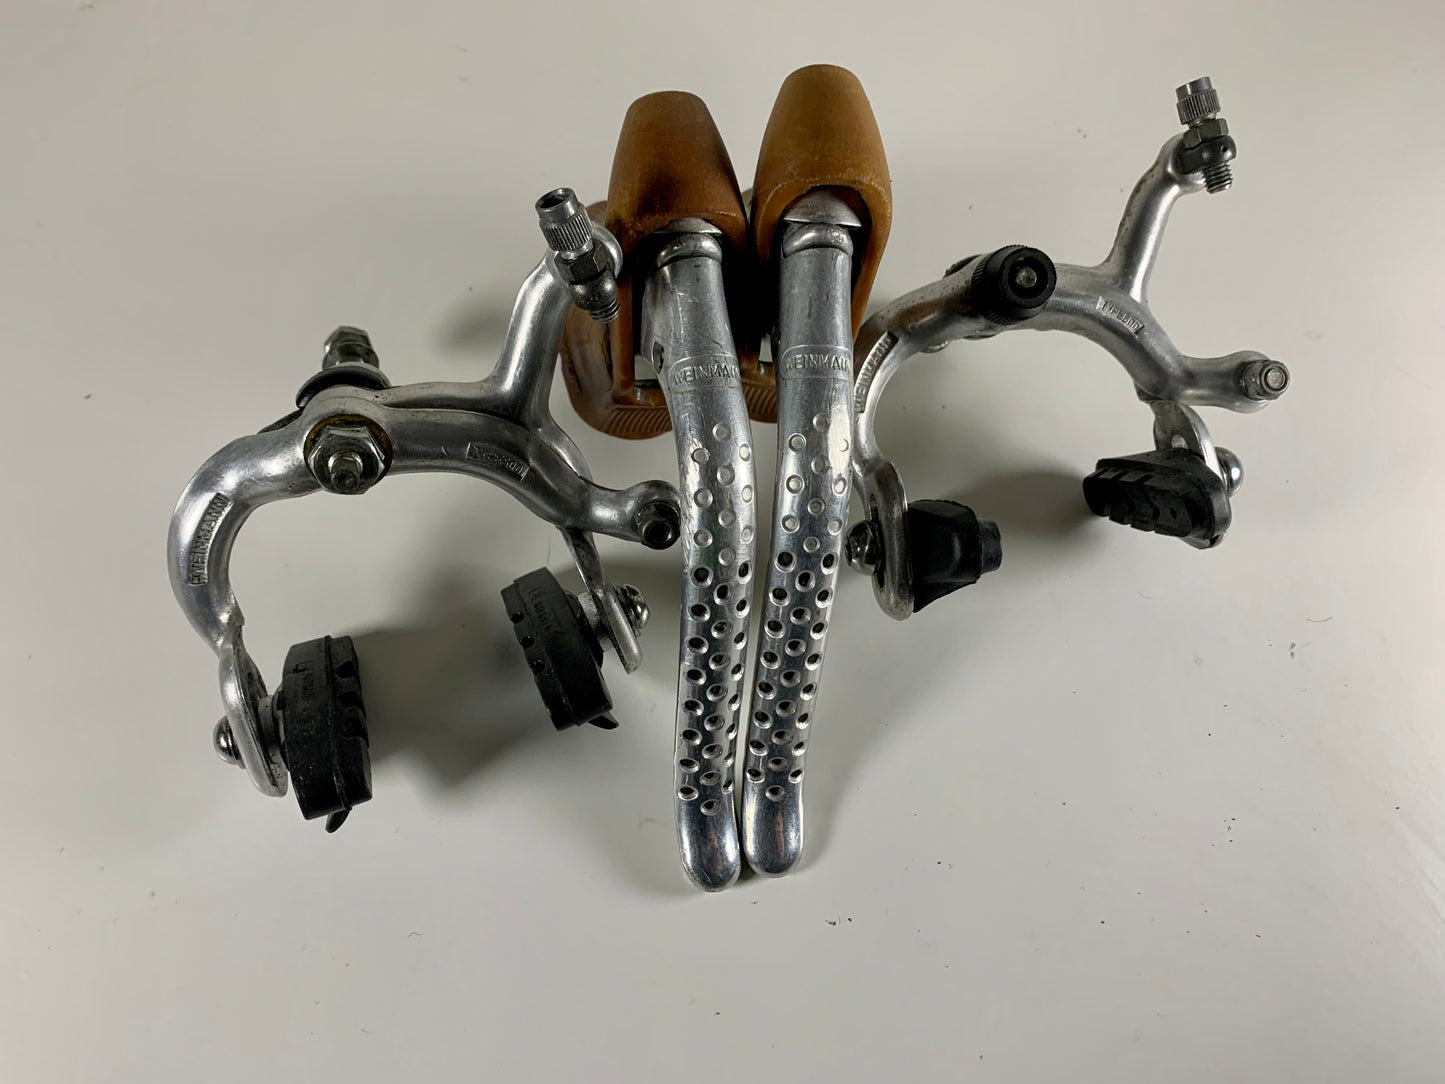 Weimann Type 500 brake callipers and brake levers